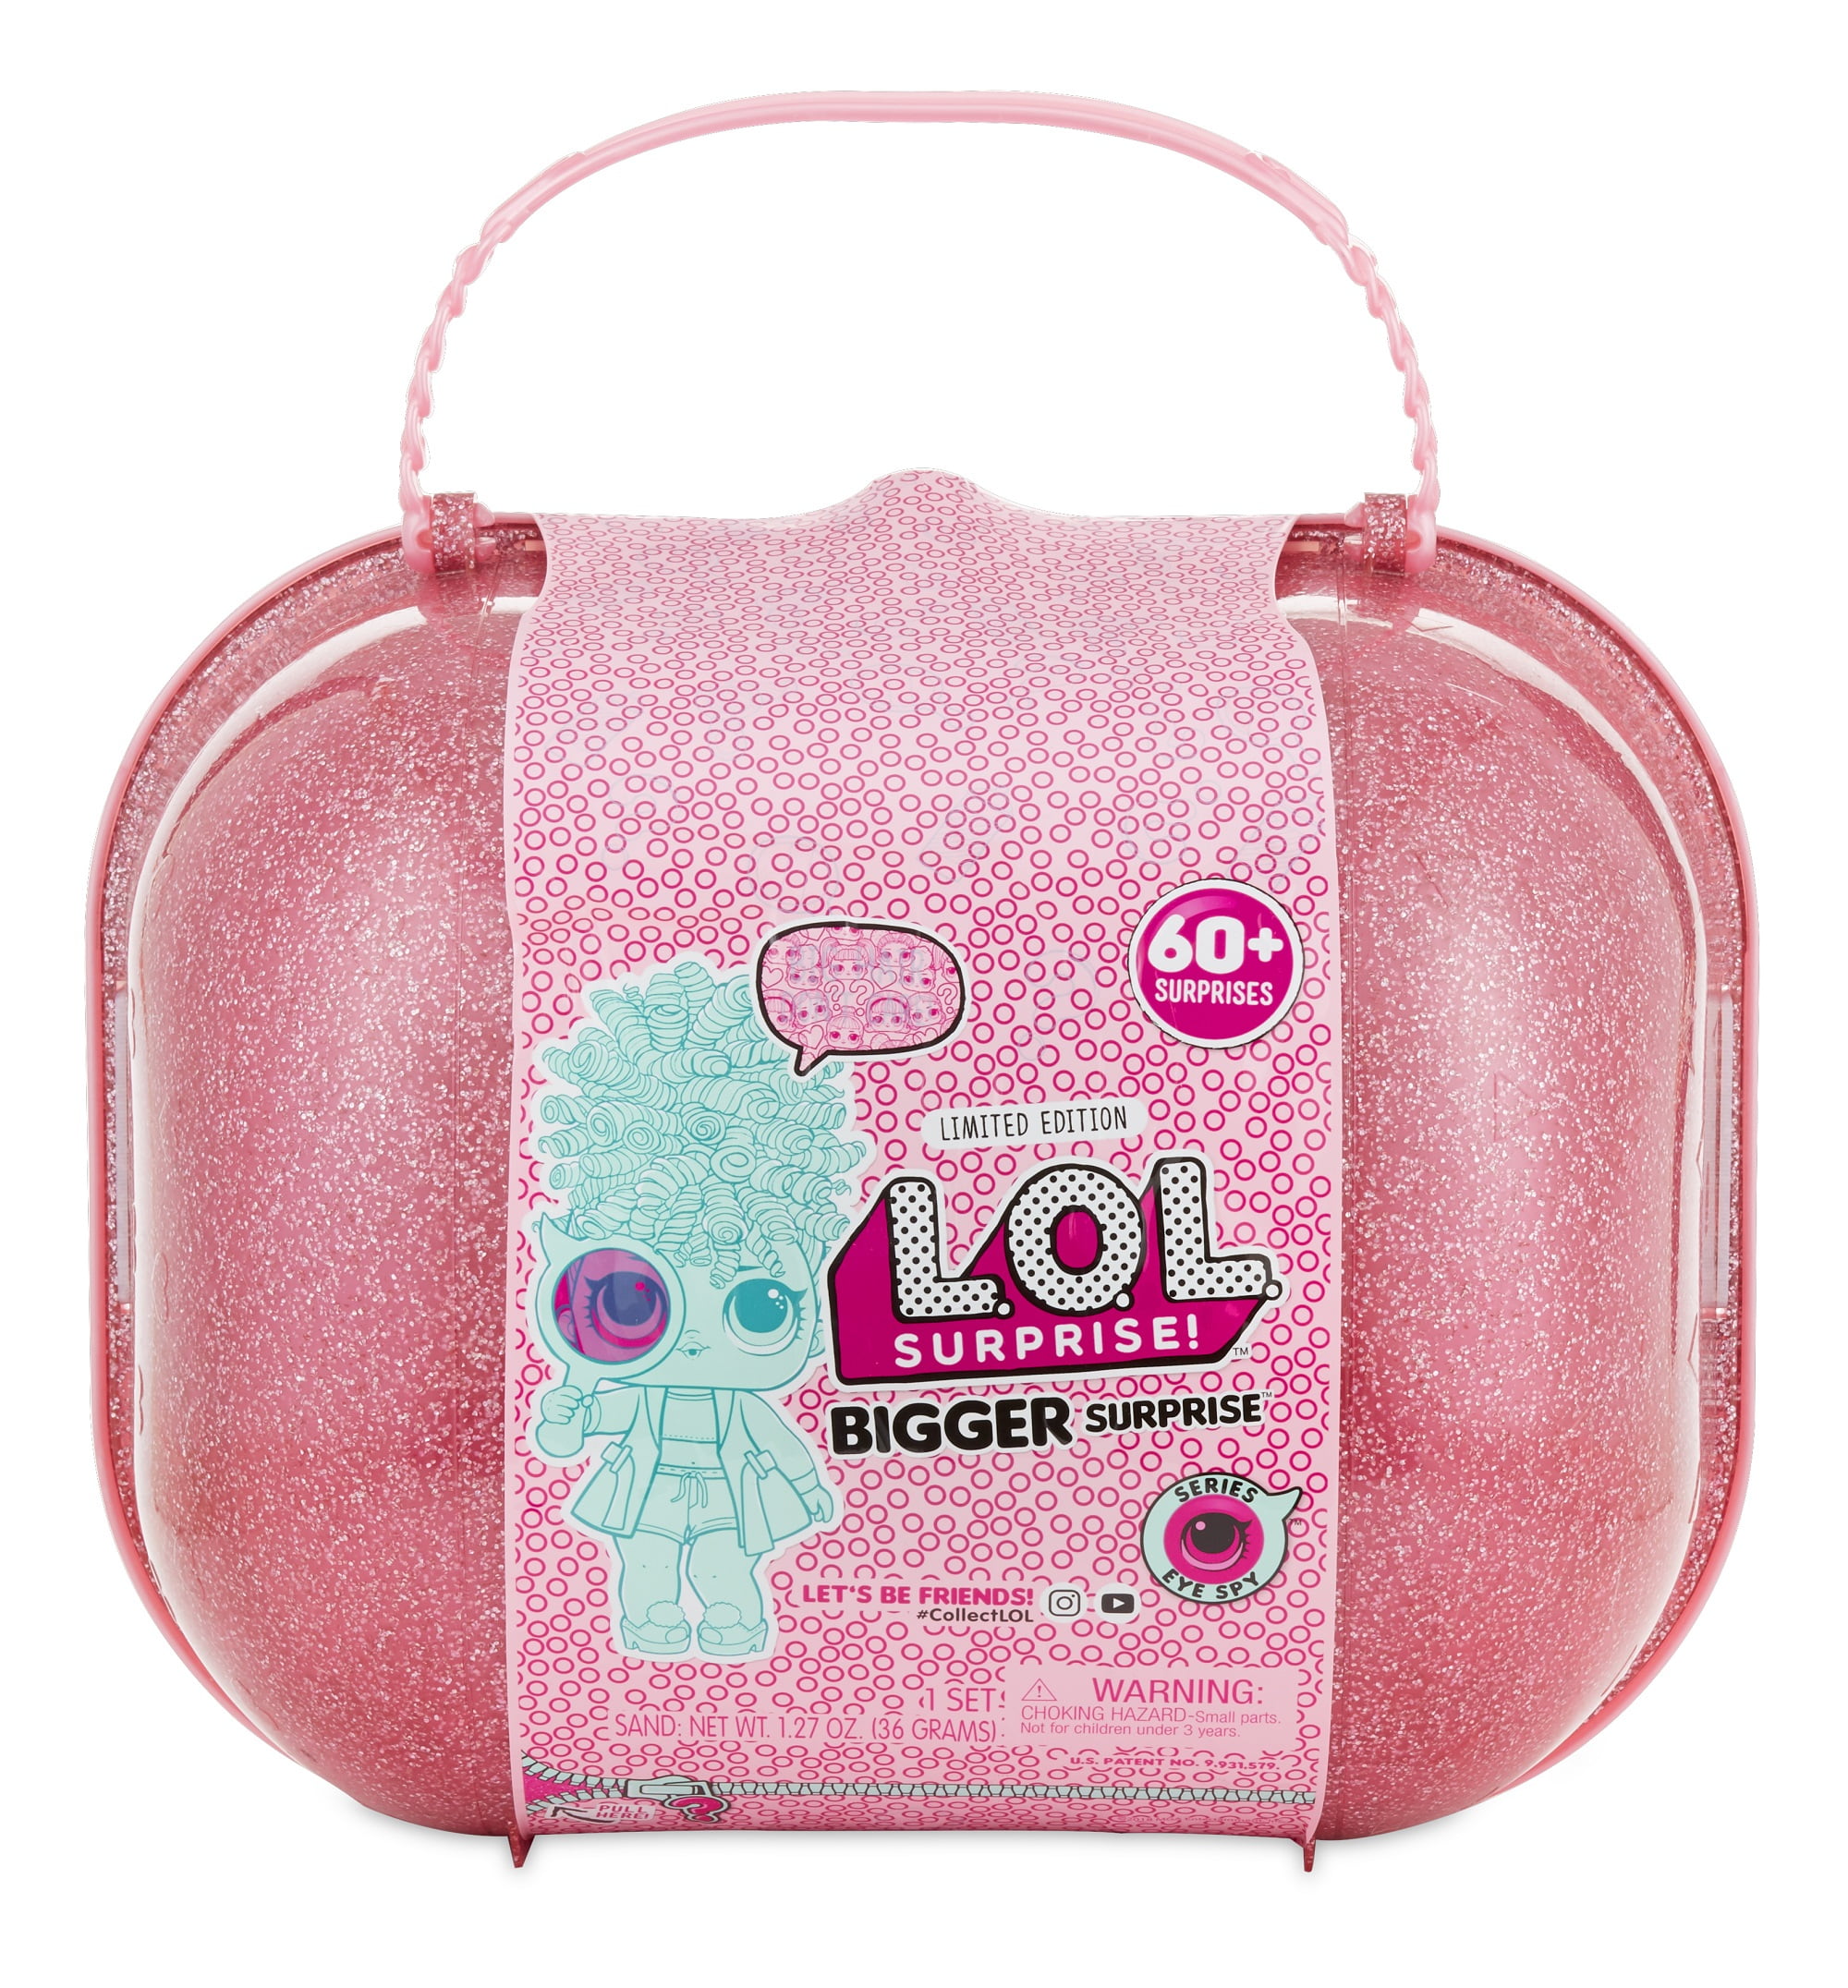 LOL Surprise Doll SIS SWING FAMILY & LIL SIS Series 1 TOYS GIFTS FOR GIRLS 